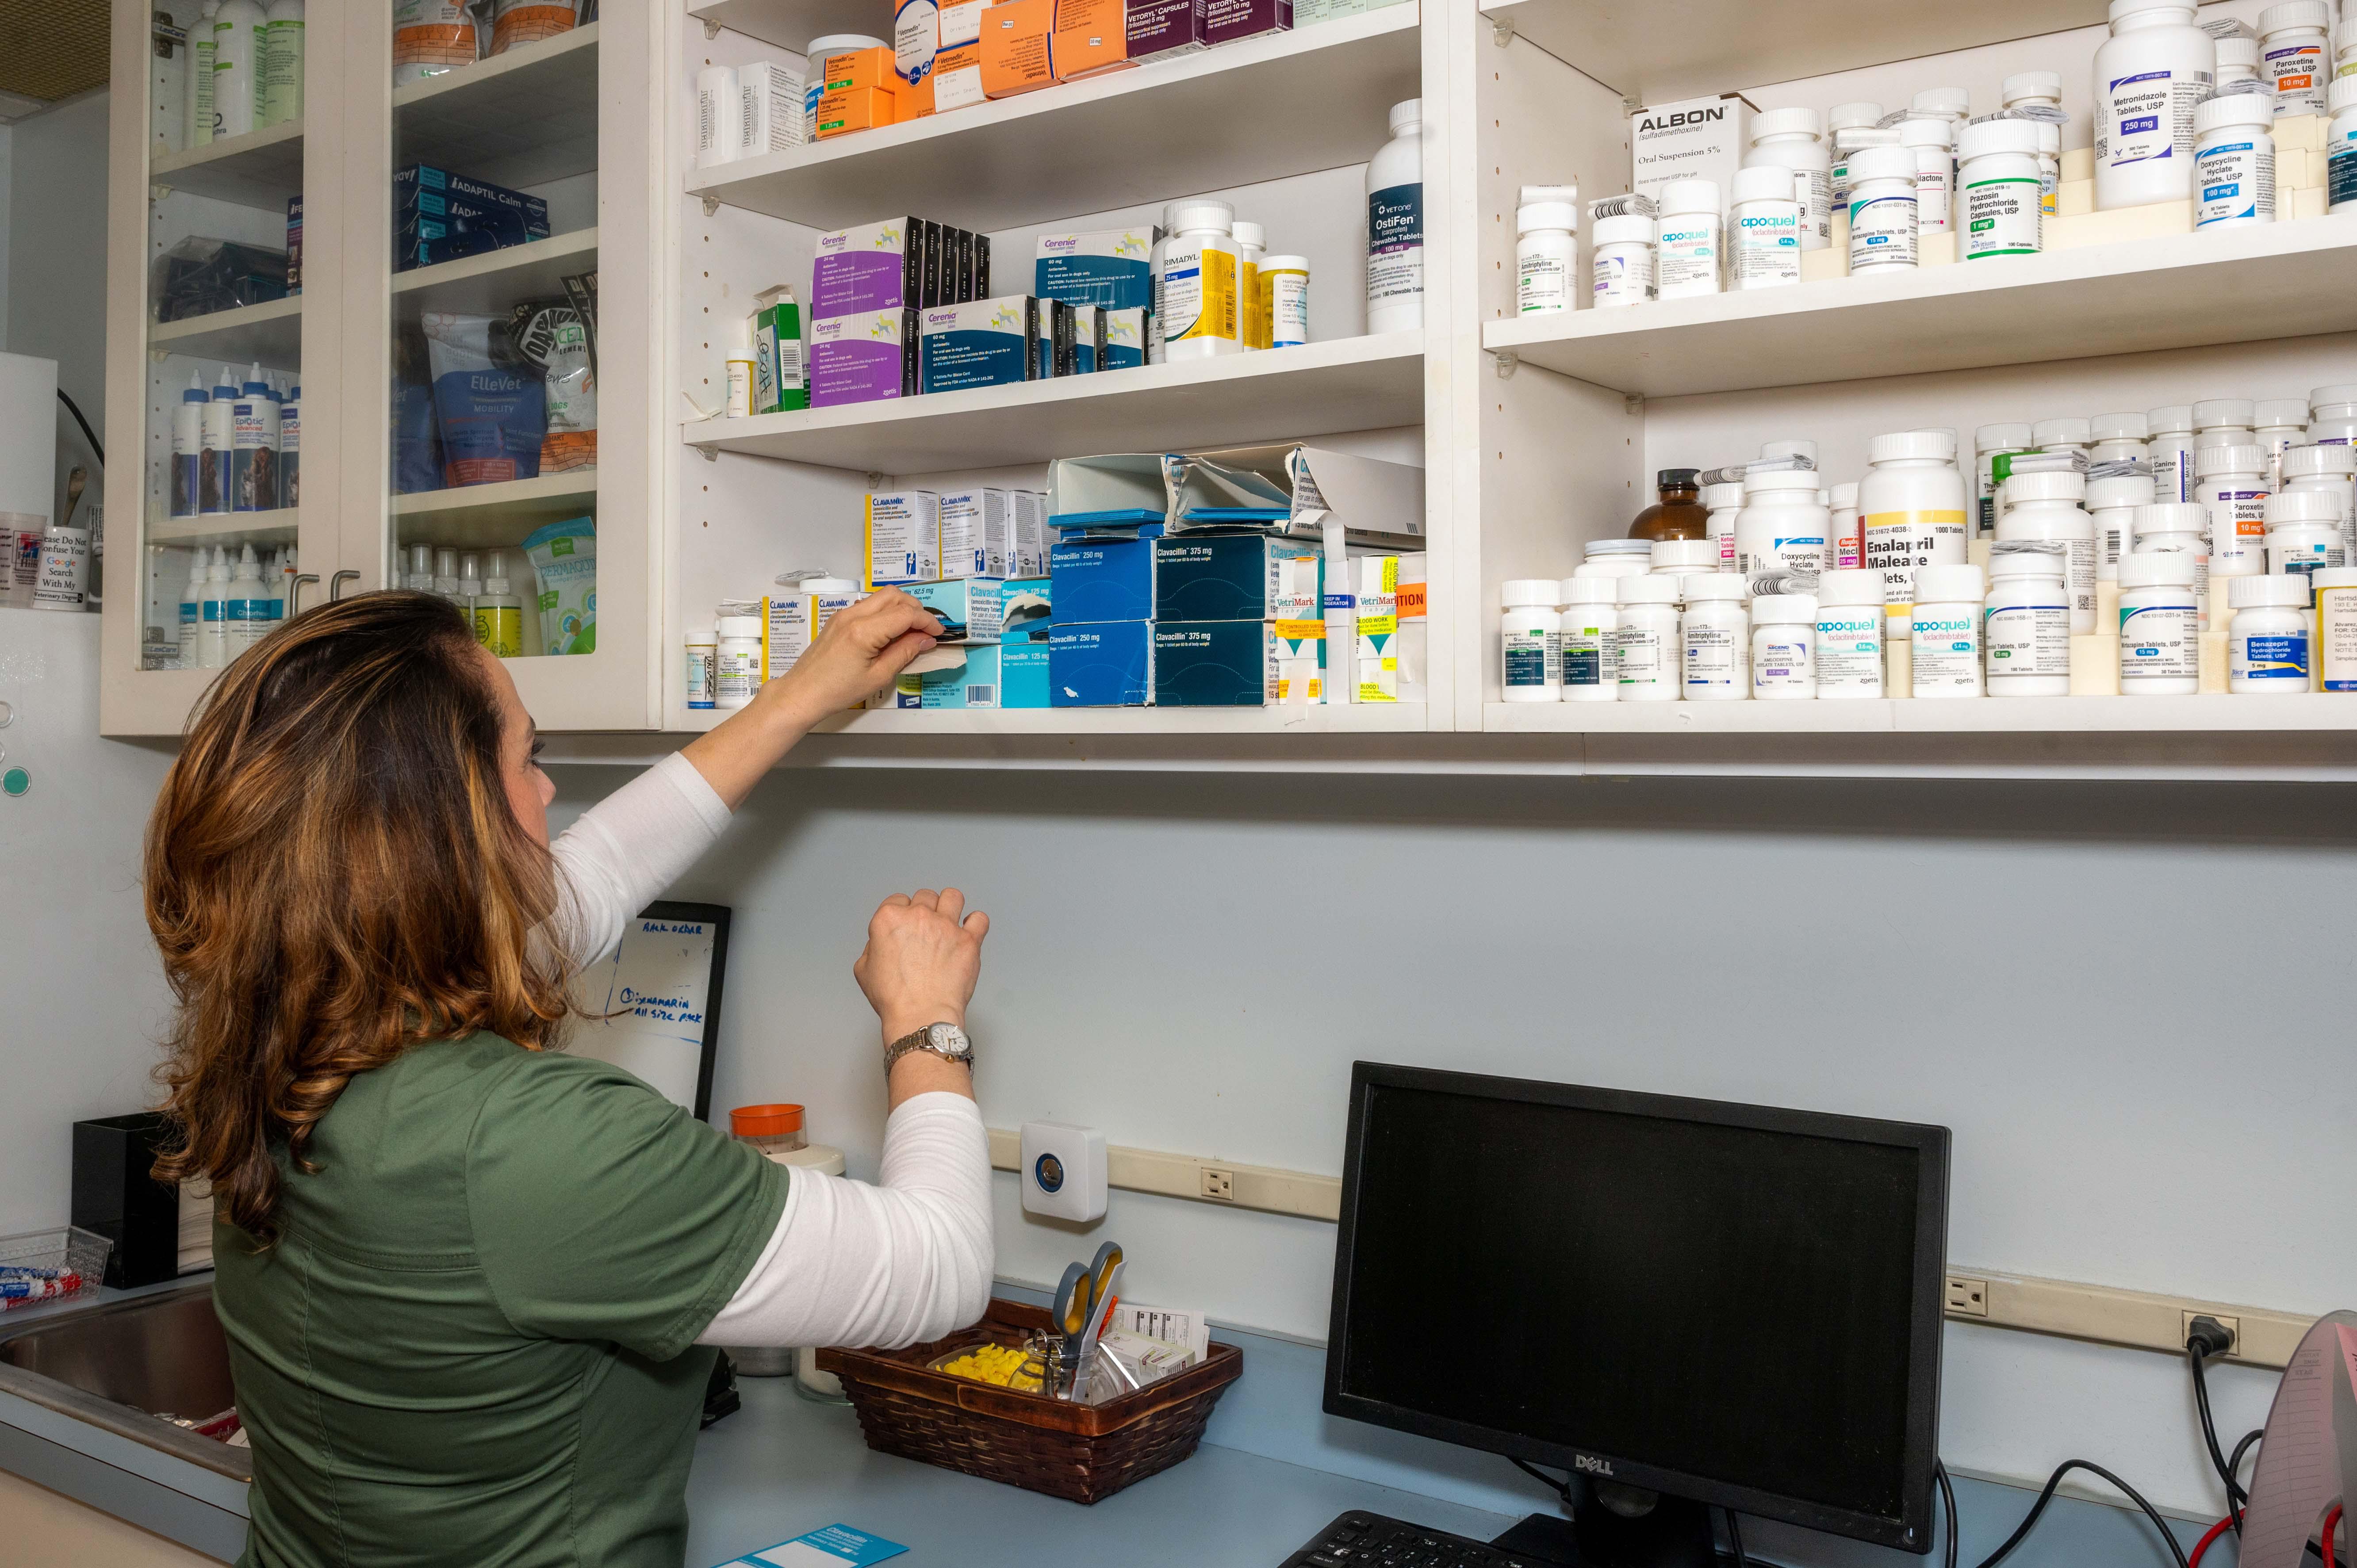 The facility at Hartsdale Veterinary Hospital houses an on-site pharmacy to give our clients convenient and direct access to a wide range of medications their pets may need.